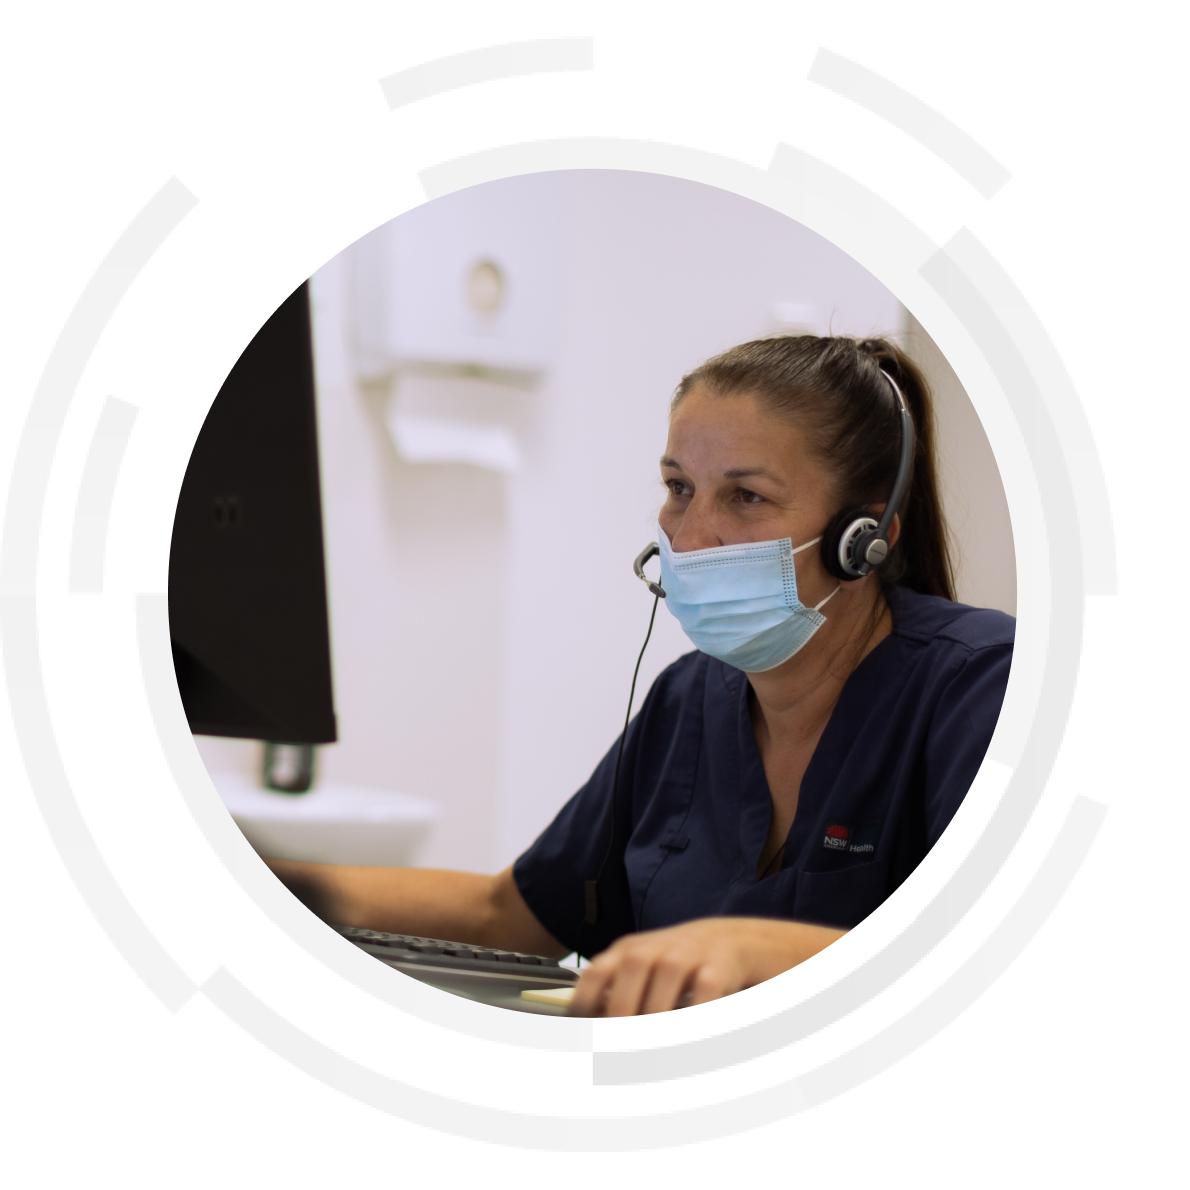 Female nurse wearing a mask and headset looking at computer monitor.